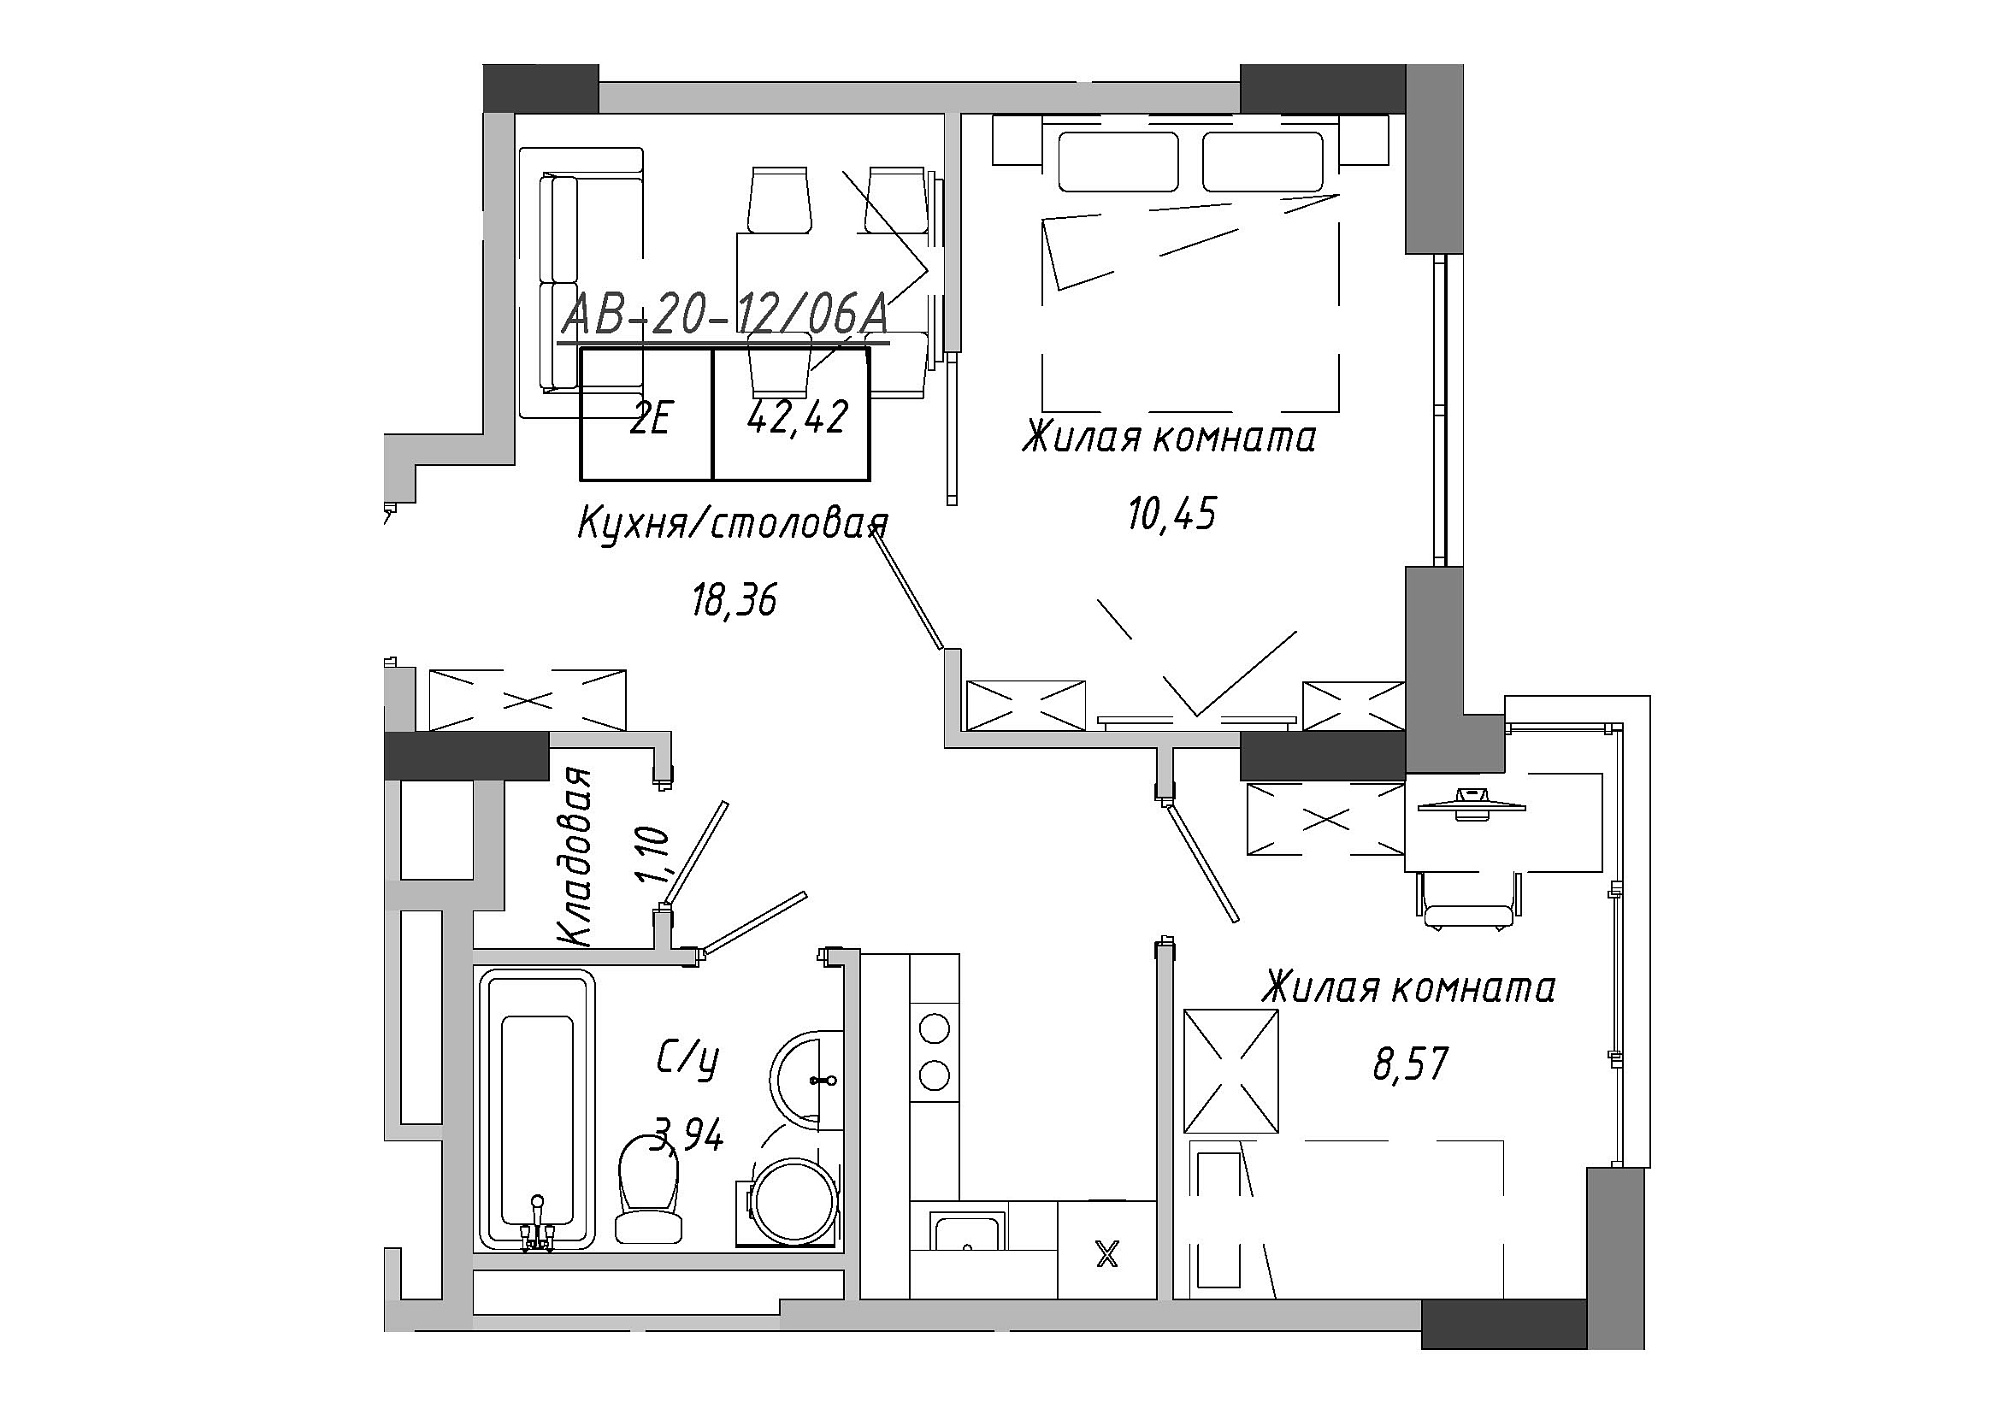 Planning 2-rm flats area 42.85m2, AB-20-12/0006а.